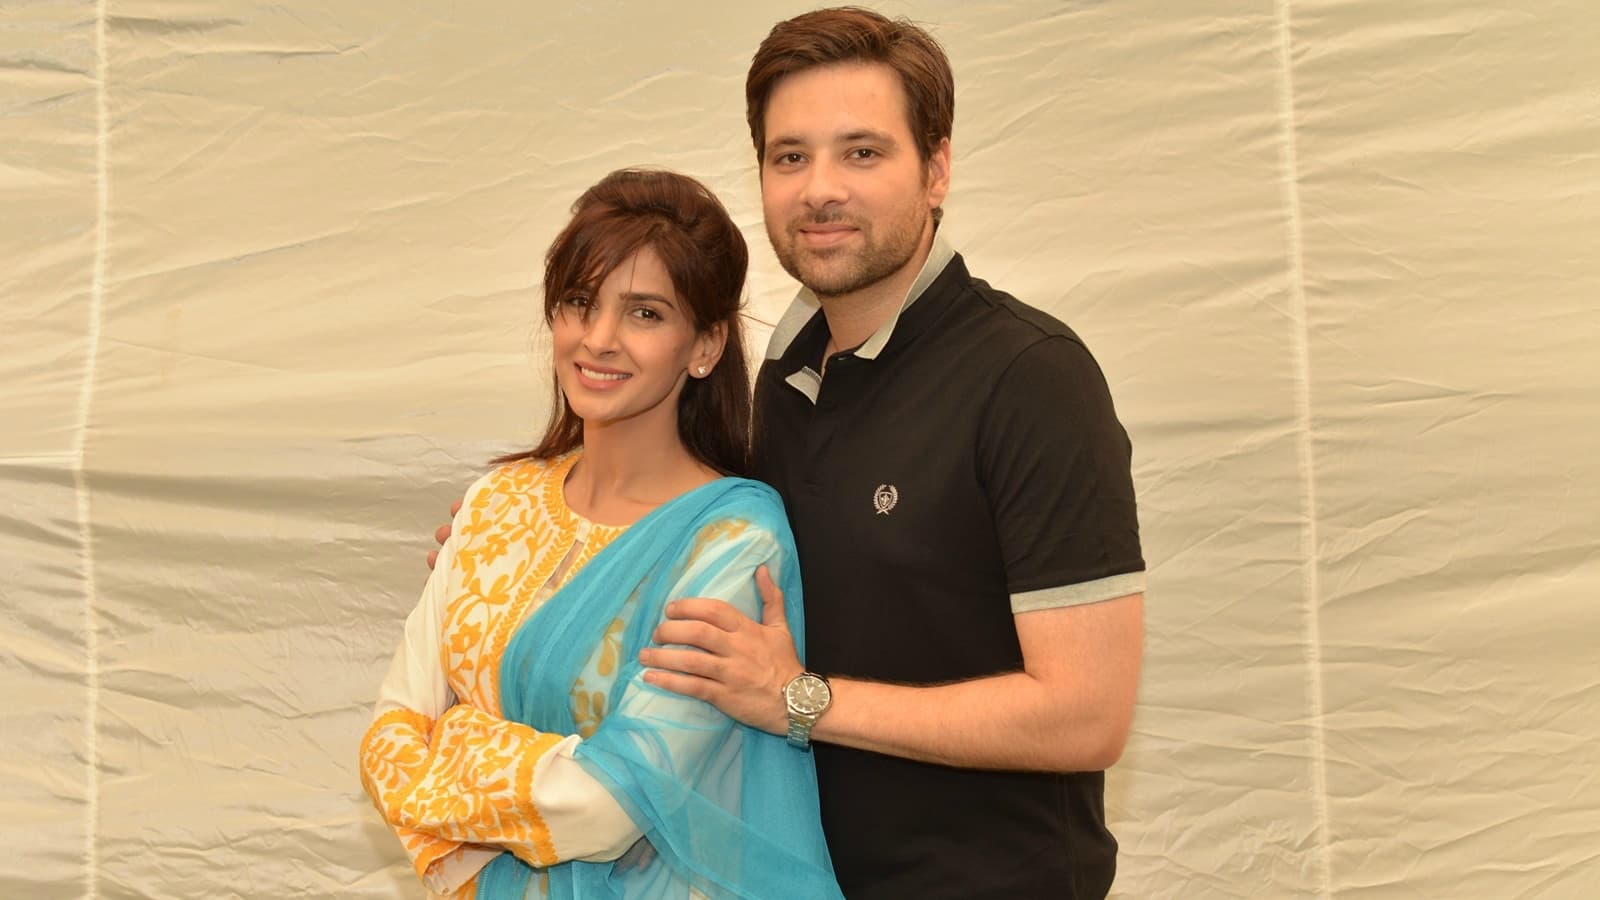 The Happily Wedded Couple Of Sangat - Saba Qamar And Mikaal Zulfiqar , HD Wallpaper & Backgrounds